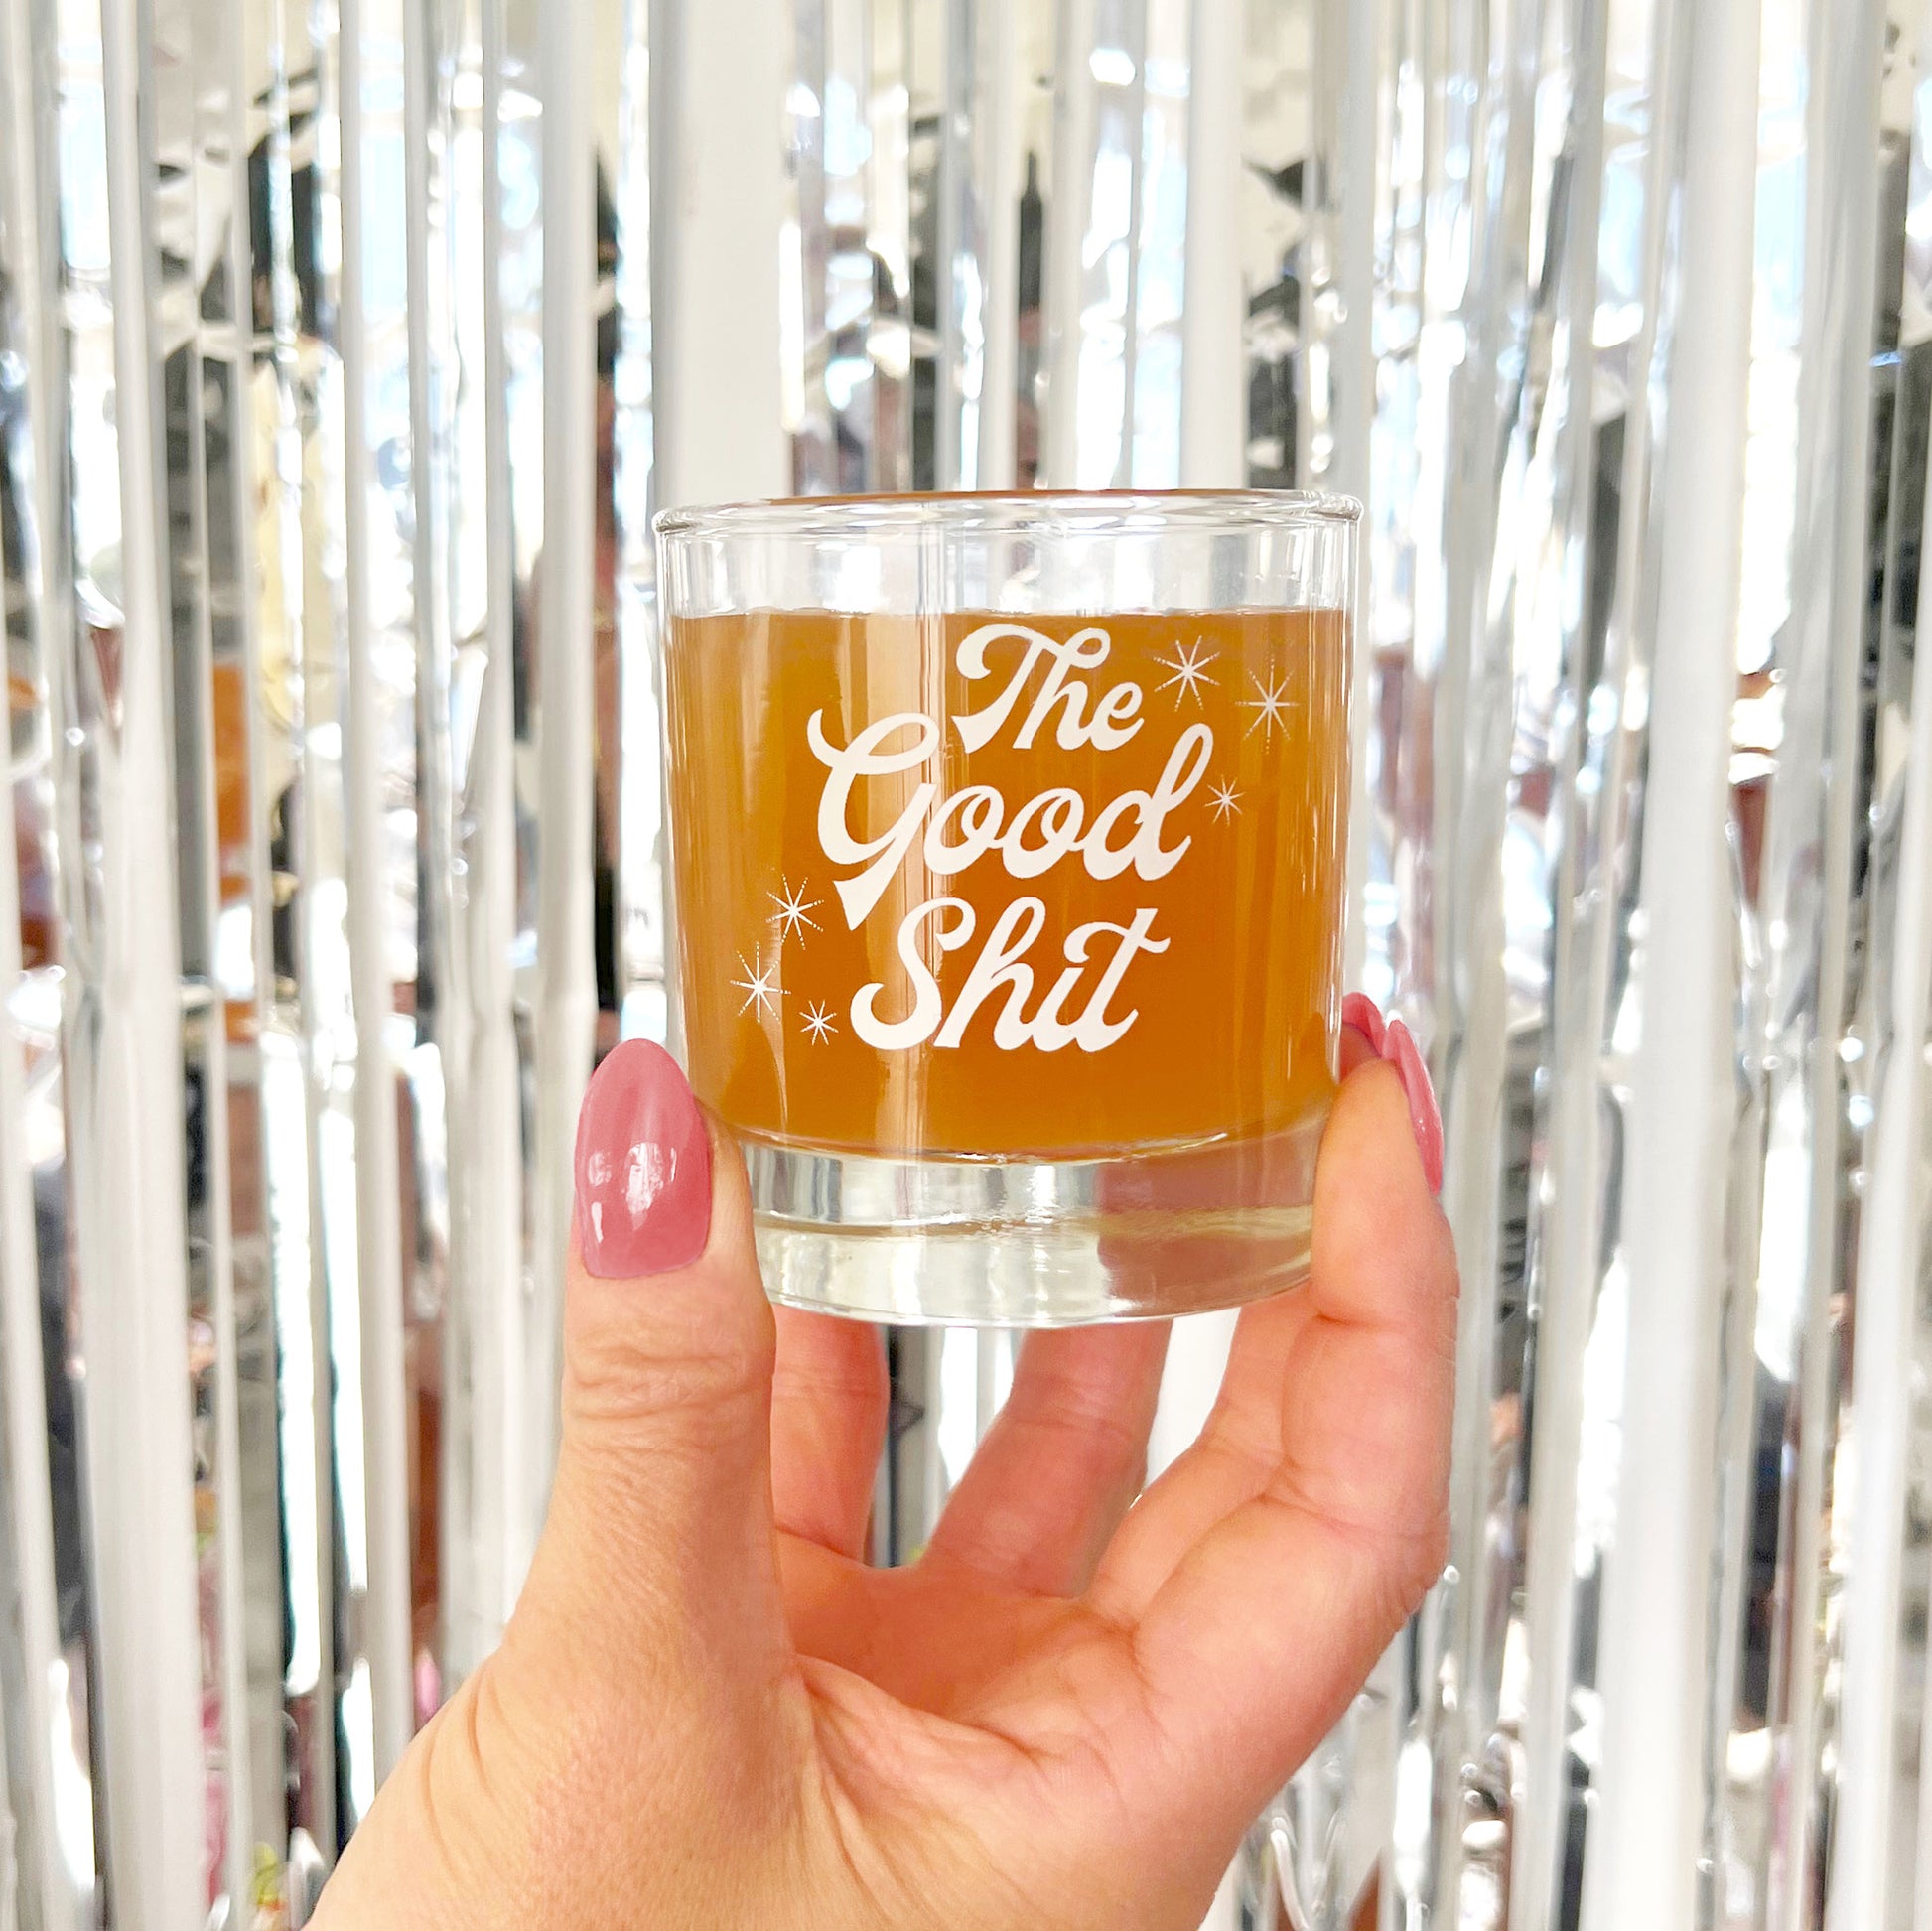 Against a silver tinsel backdrop is a photograph of a short glass tumbler with a thick bottom and "The Good Shit" printed across the center in white groovy cursive text.